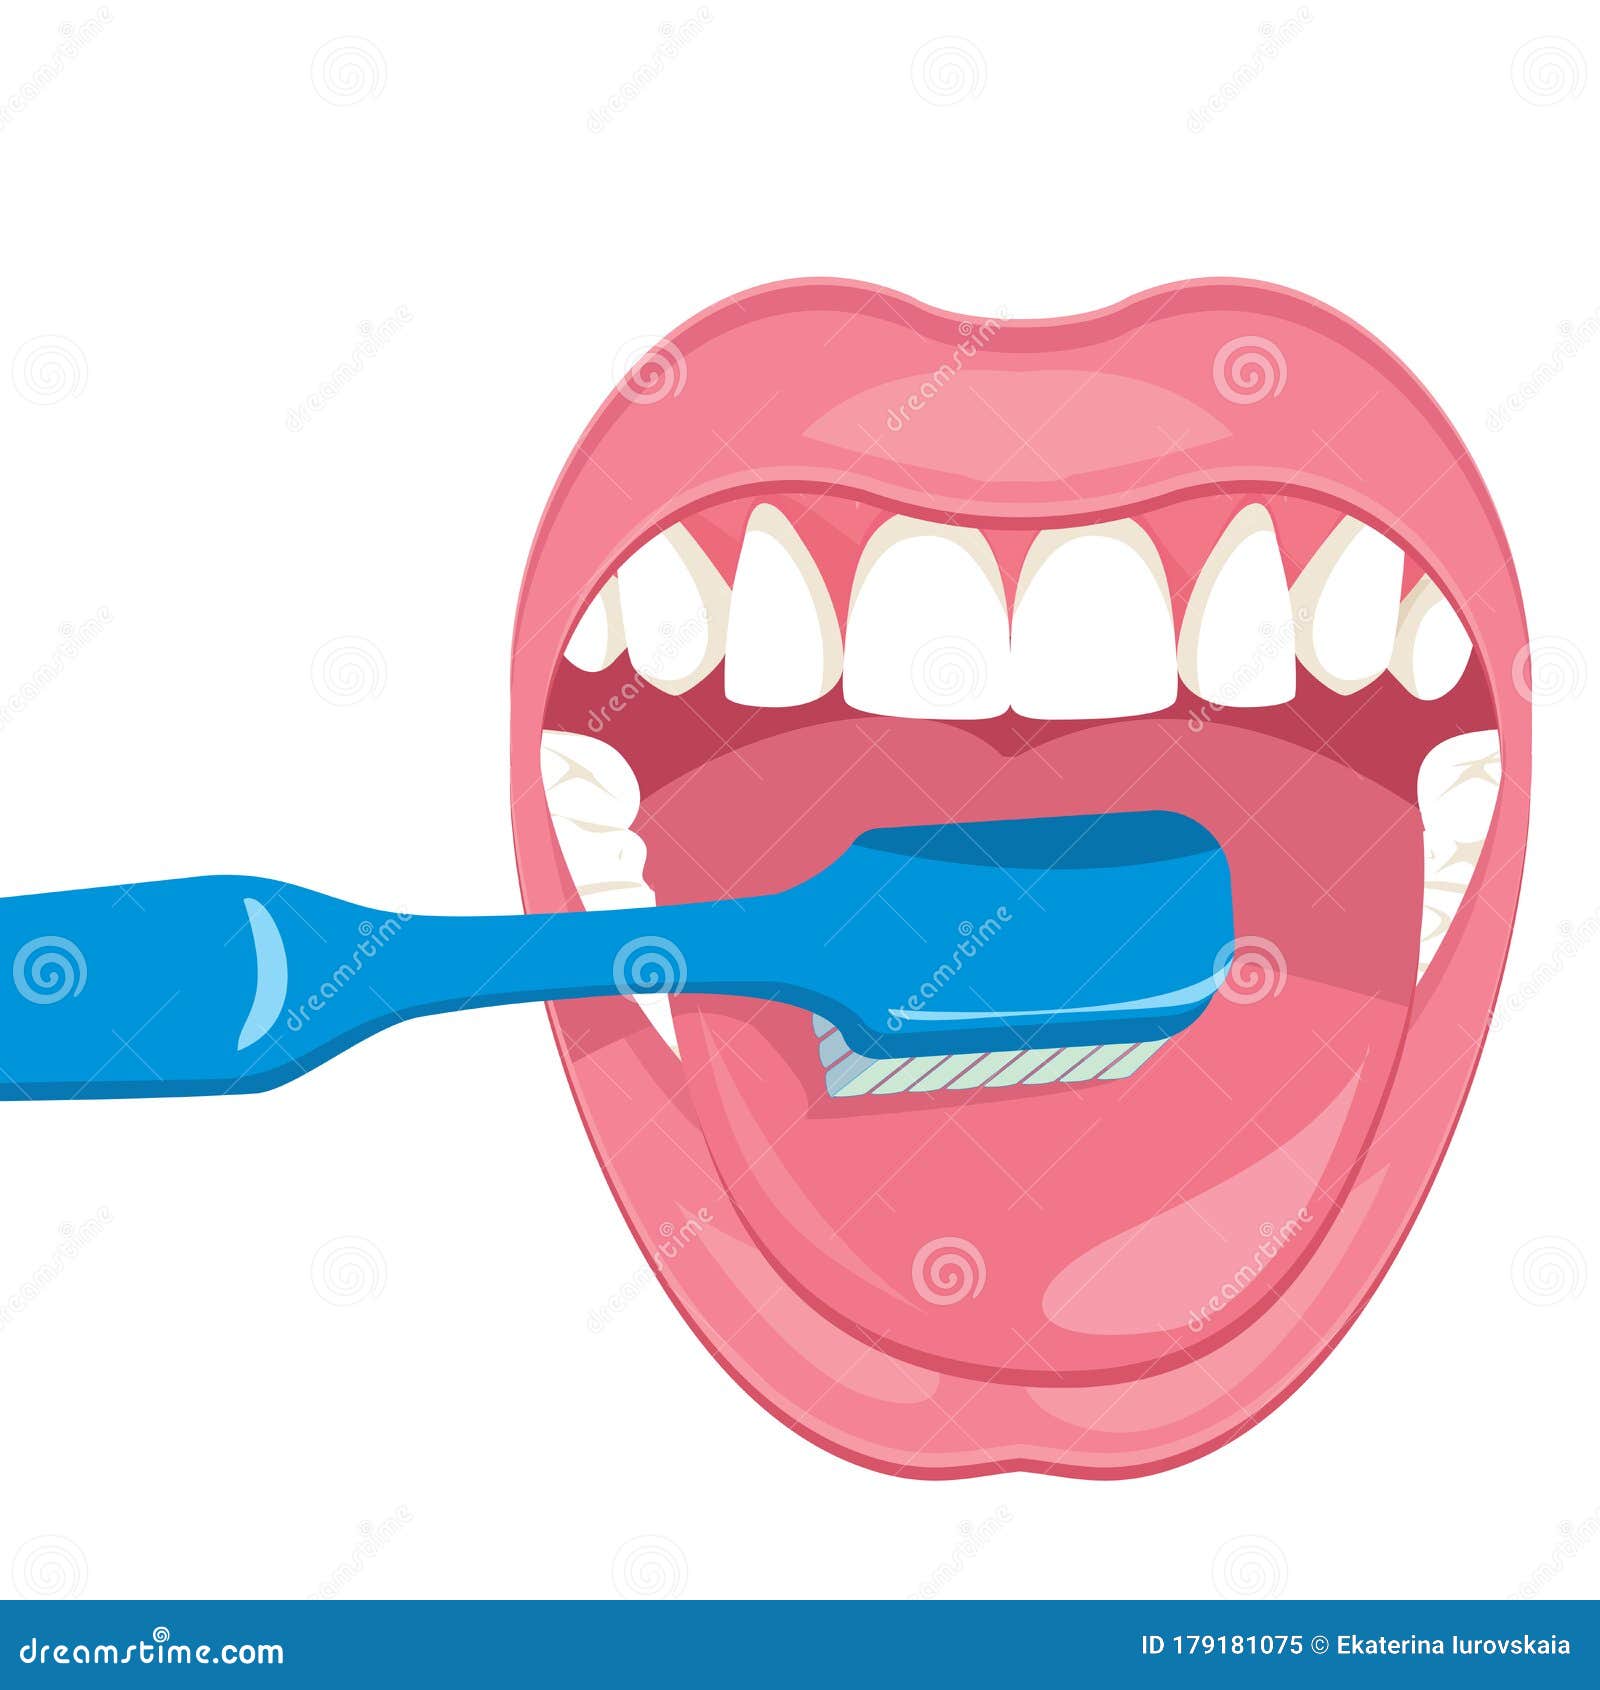 brush your teeth toothbrush vector illustration white background healthy white teeth brush your teeth toothbrush 179181075